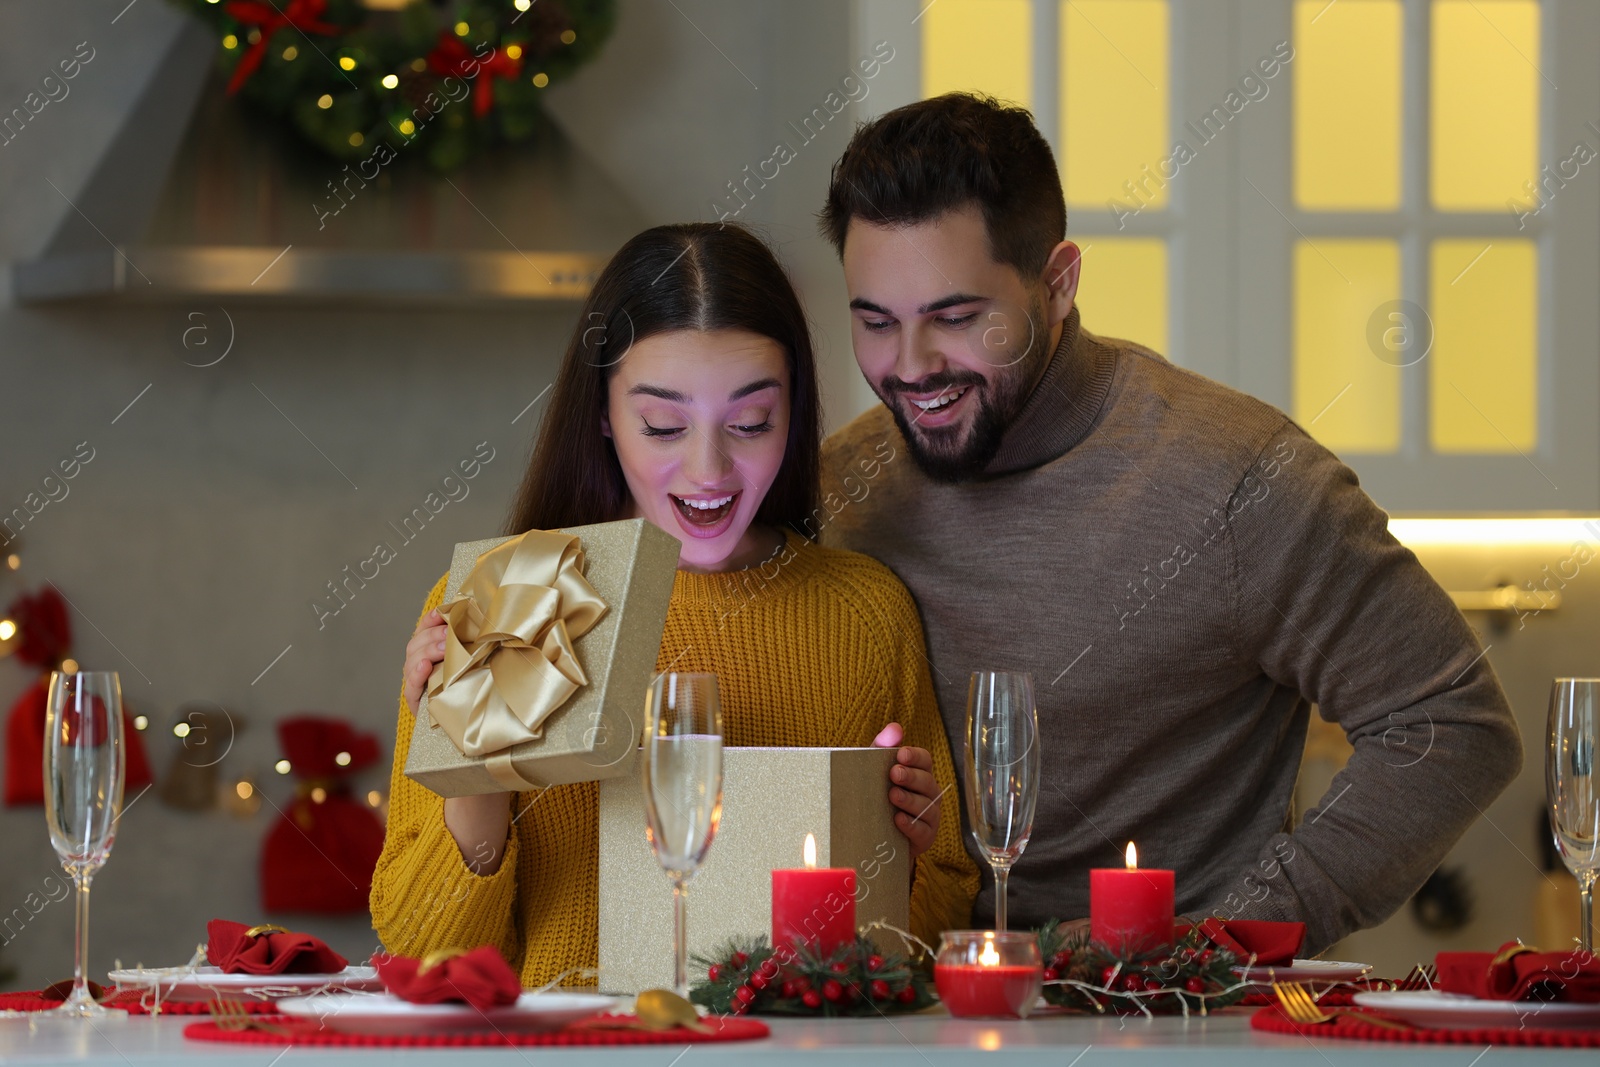 Photo of Surprised young woman opening Christmas gift from her boyfriend at table in kitchen